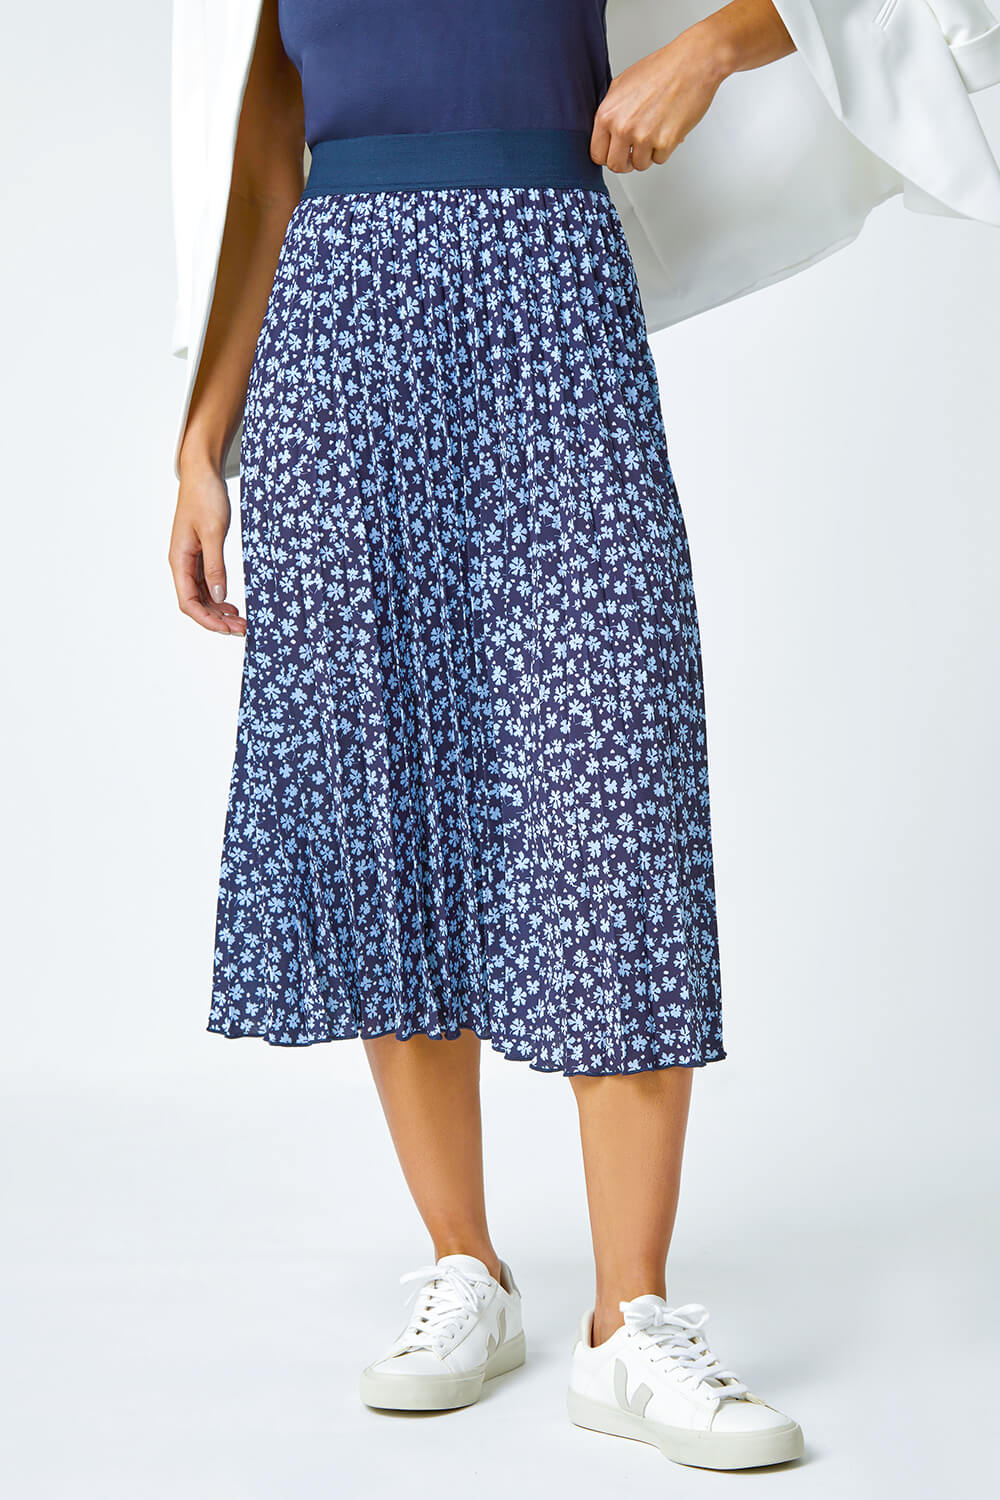 Navy  Petite Pleated Ditsy Floral Midi Skirt, Image 4 of 5